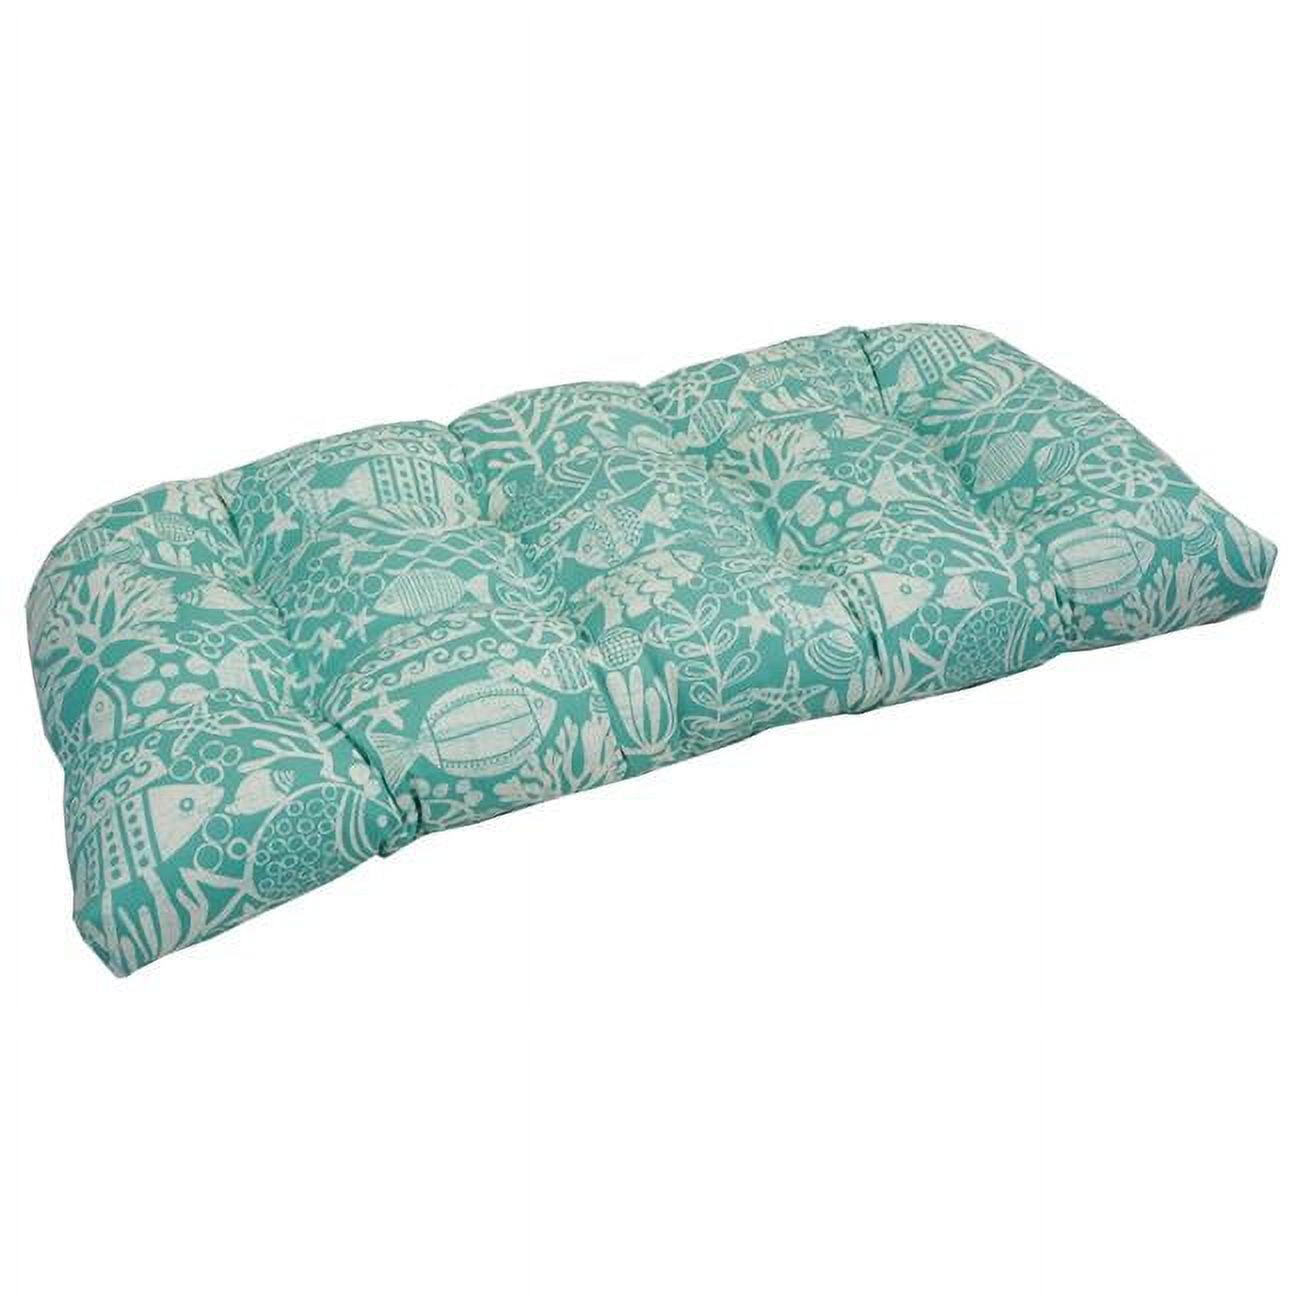 Picture of Blazing Needles 93180-LS-JO16-10 42 x 19 in. U-Shaped Patterned Spun Polyester Tufted Settee & Bench Cushion&#44; Maritime Sea